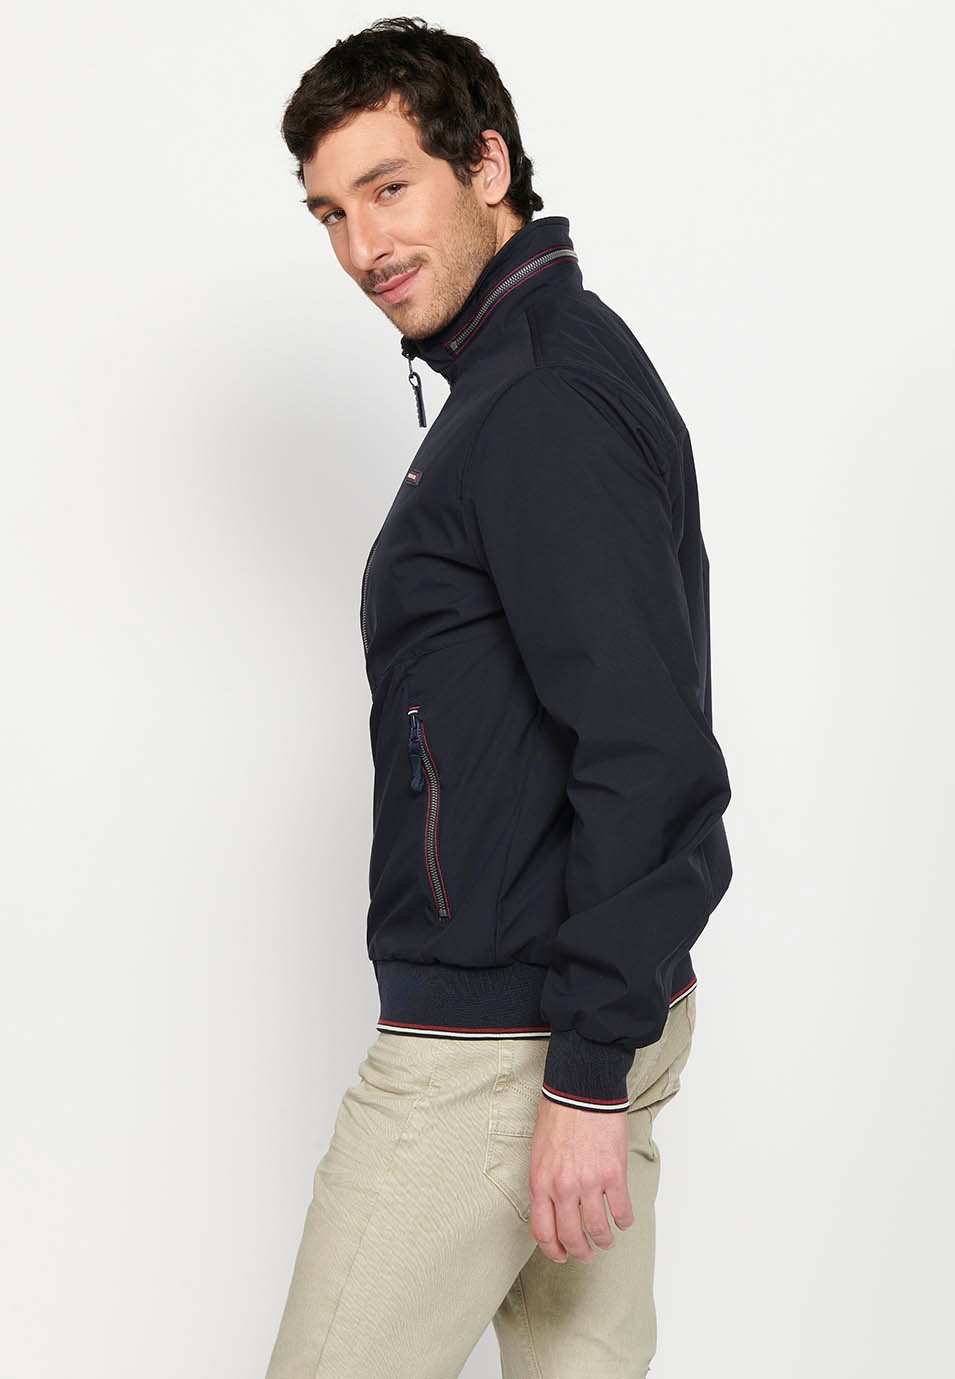 Long-sleeved high-neck jacket with front zipper closure and ribbed finishes with pockets, one inside in Navy for Men 7